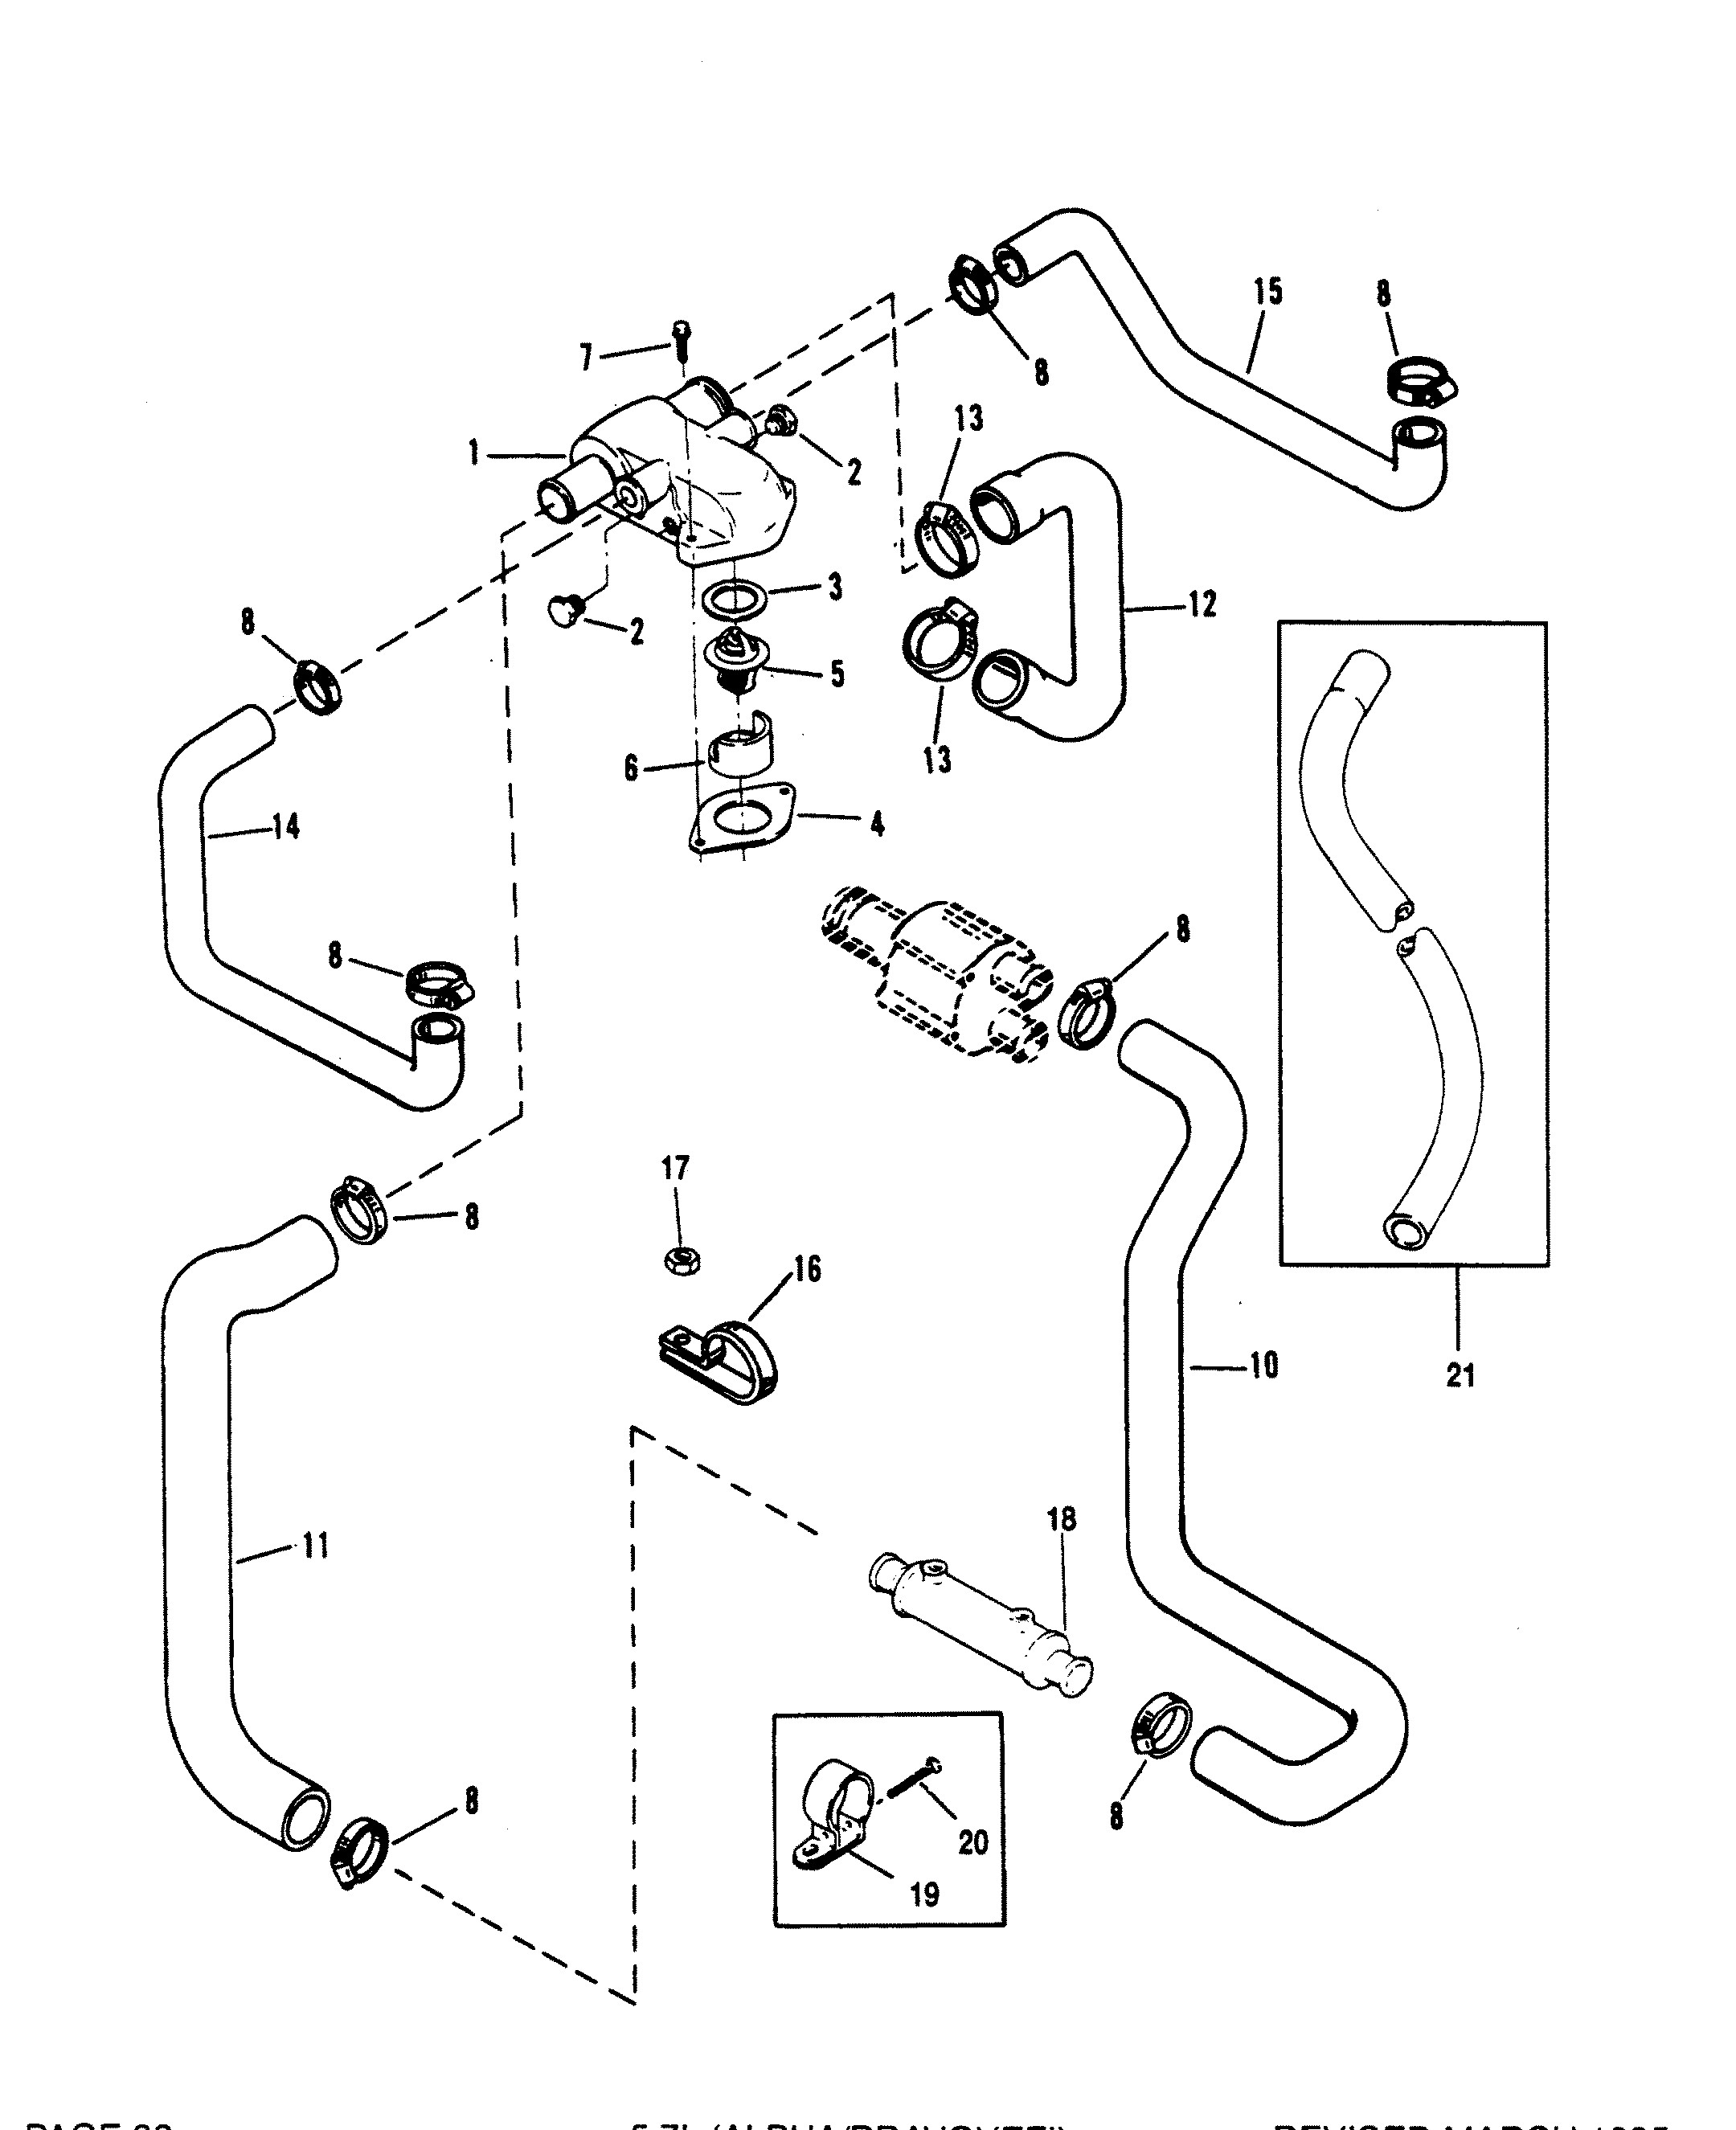 Mercruiser Engine Parts Diagram thermostat Housing Standard Cooling for Mercruiser 5 7l Alpha Of Mercruiser Engine Parts Diagram